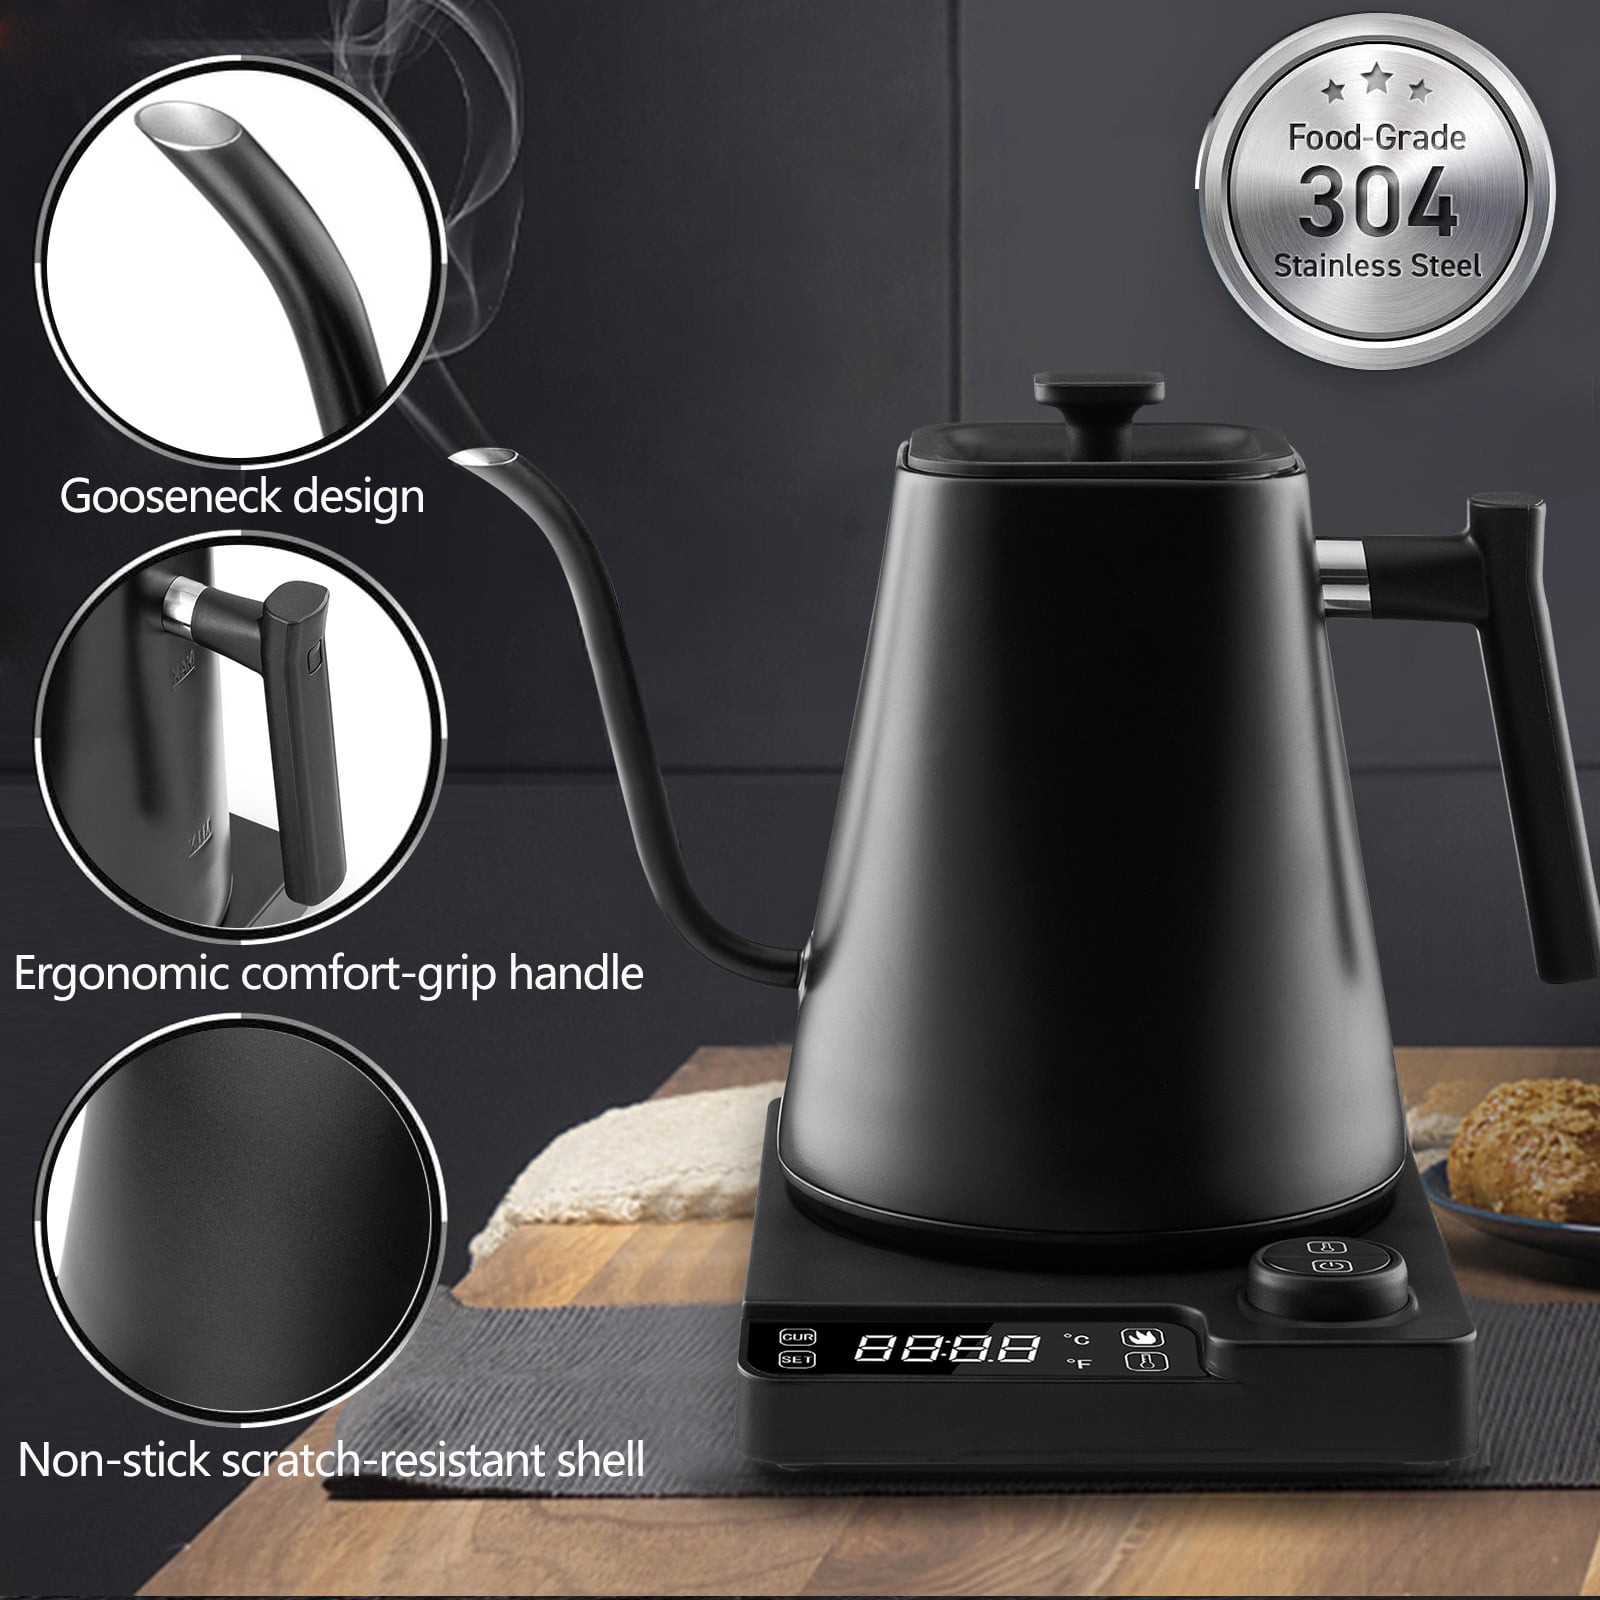  Barismate Electric Stainless Steel Gooseneck Kettle Temperature  Control Variable For Coffee Tea Water Pour Over 1200 Watt Quick Heating 1  Liter Boil-dry Protection Touch Screen Matte Black: Home & Kitchen